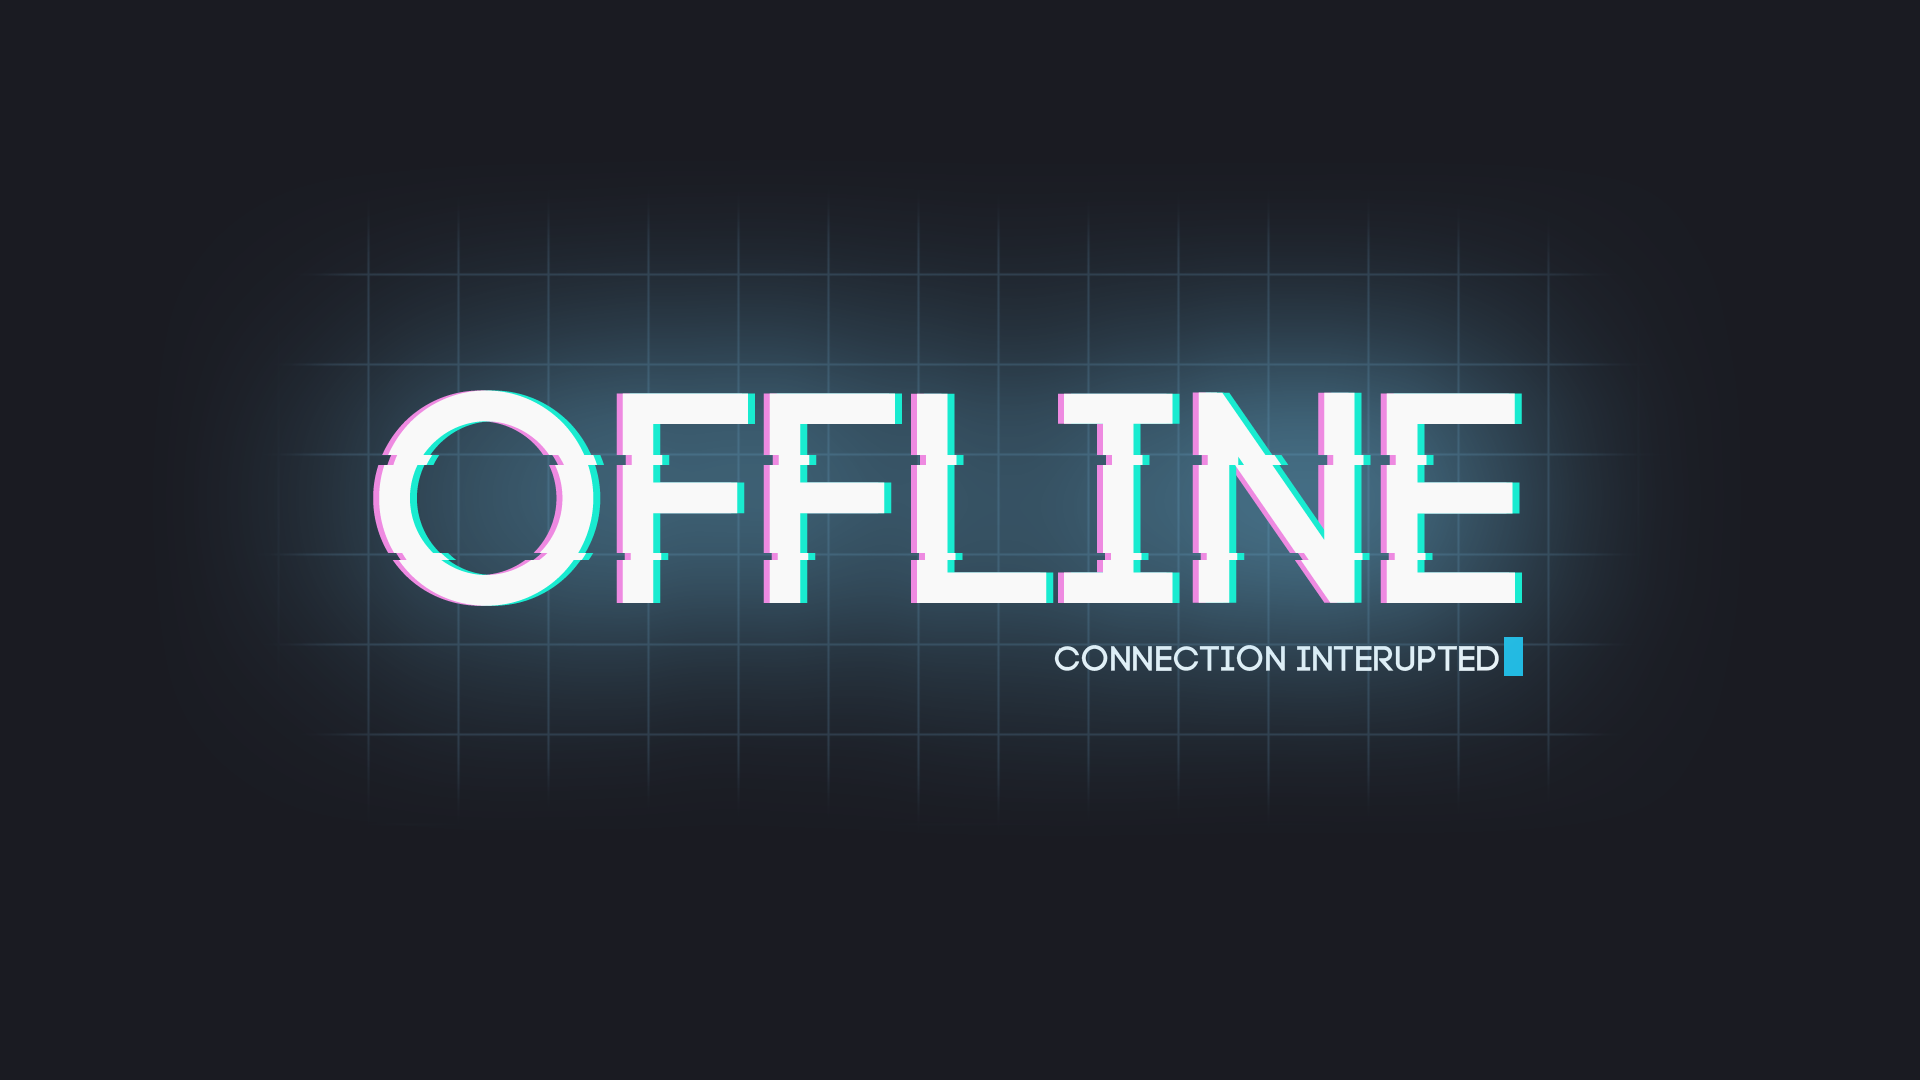 Twitch Offline Pictures to Pin on Pinterest - PinsDaddy - 1920 x 1080 png 168kB